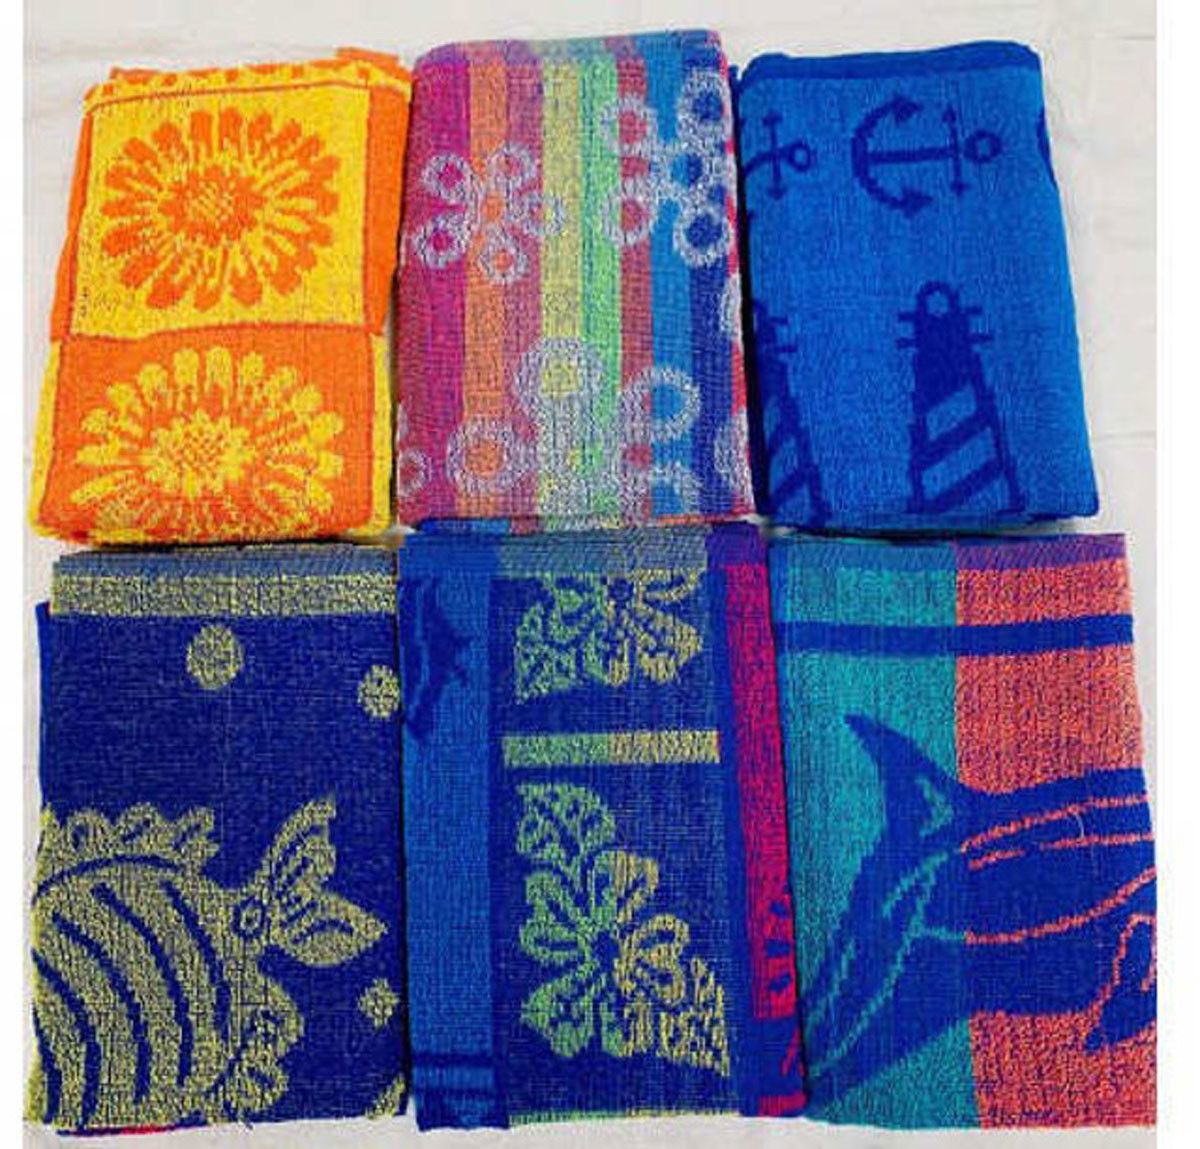 Are there more luxurious or durable alternatives to these economy/ cheap beach towels?